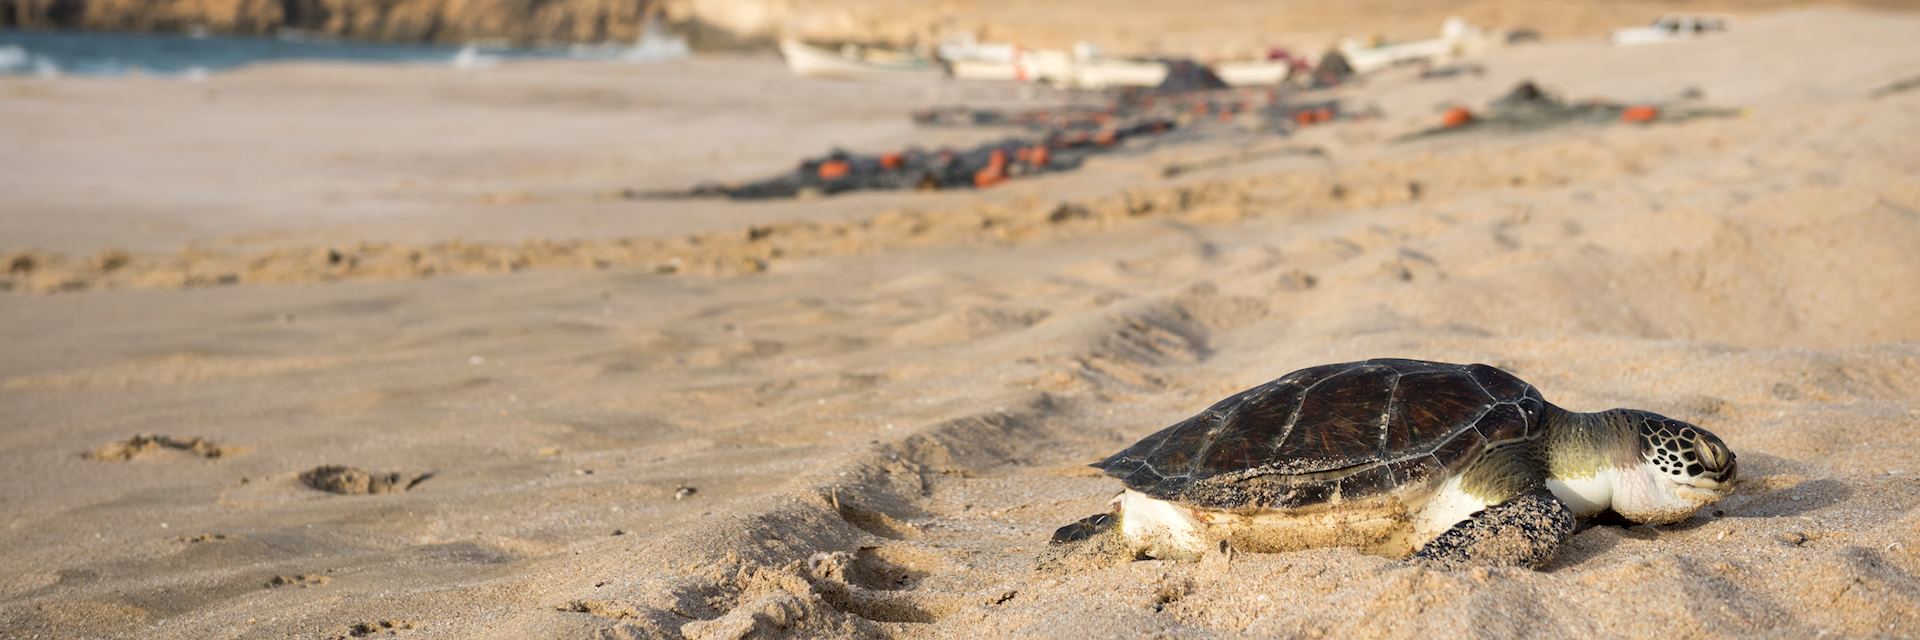 Turtle Beach, Turtle Conservation in Oman